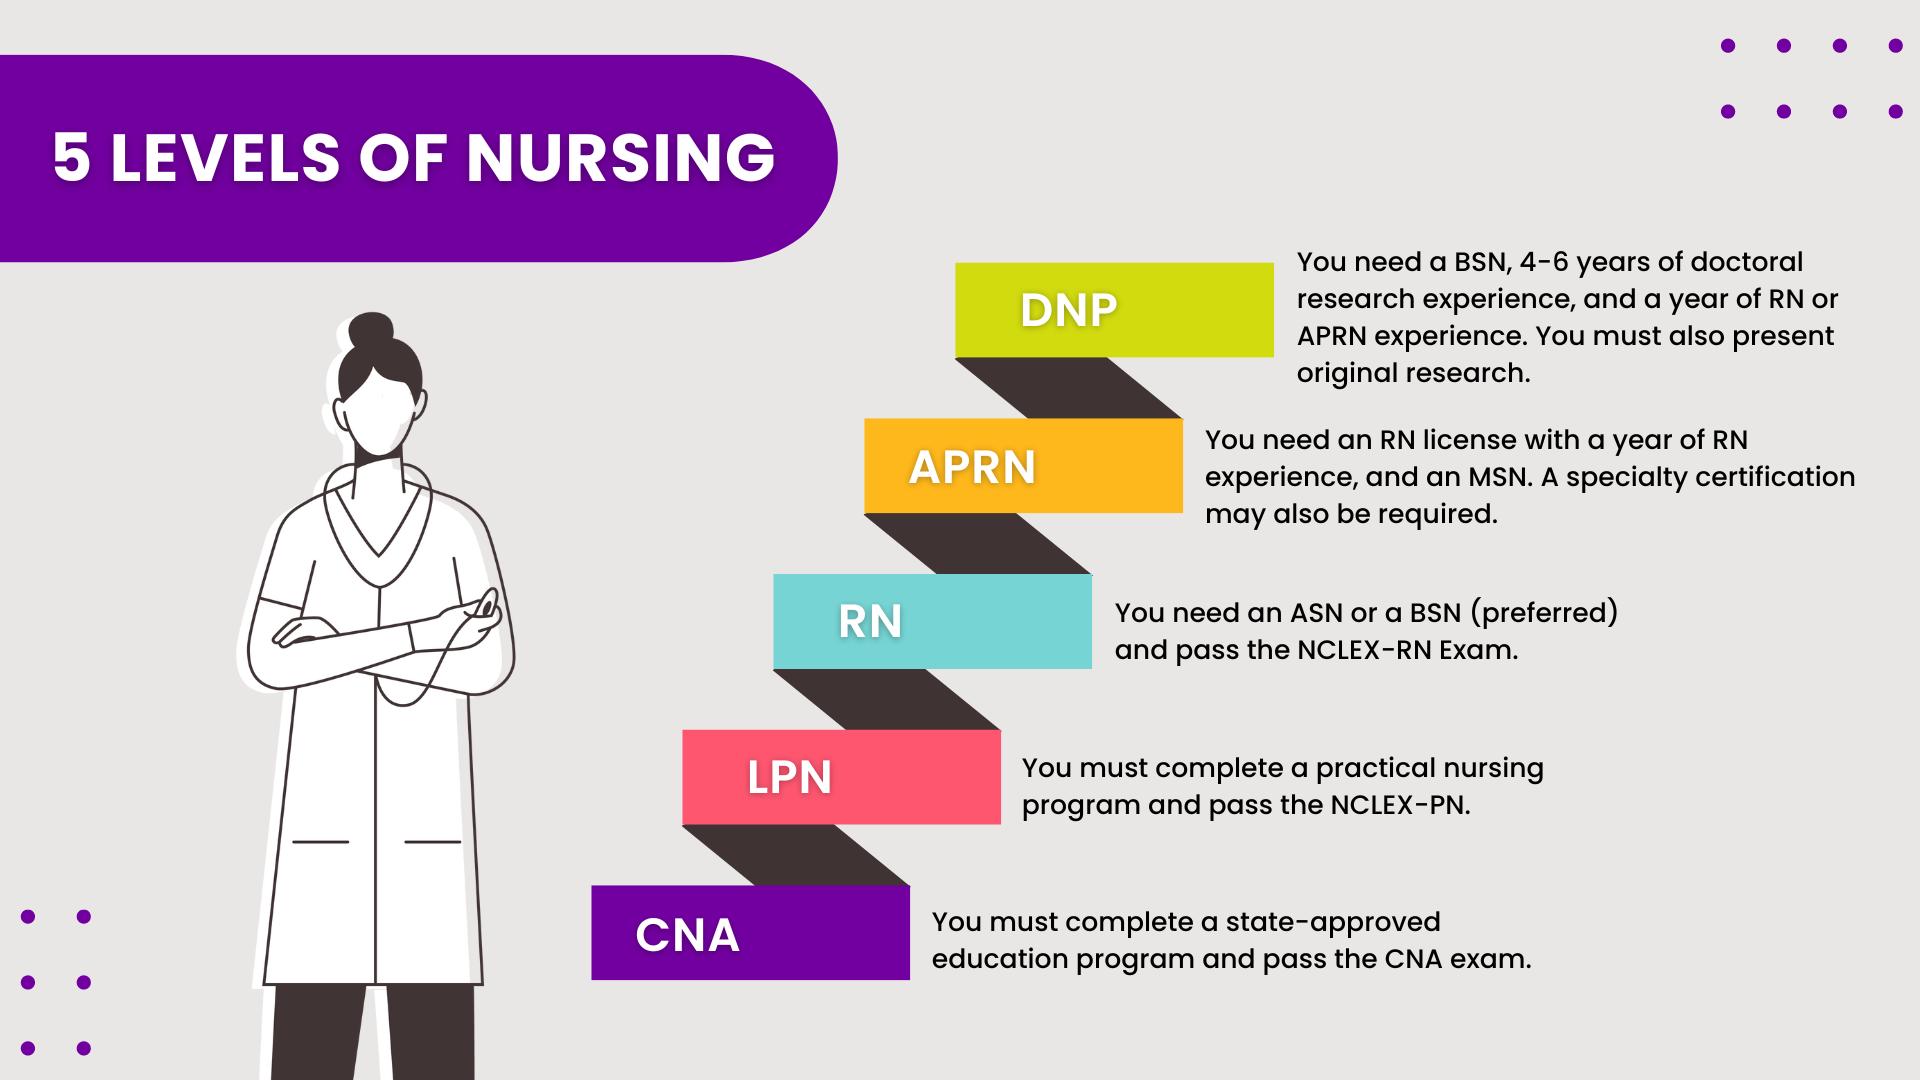 An illustration that showcases and describes the five levels of nursing: CNA, LPN, RN, APRN and DNP.